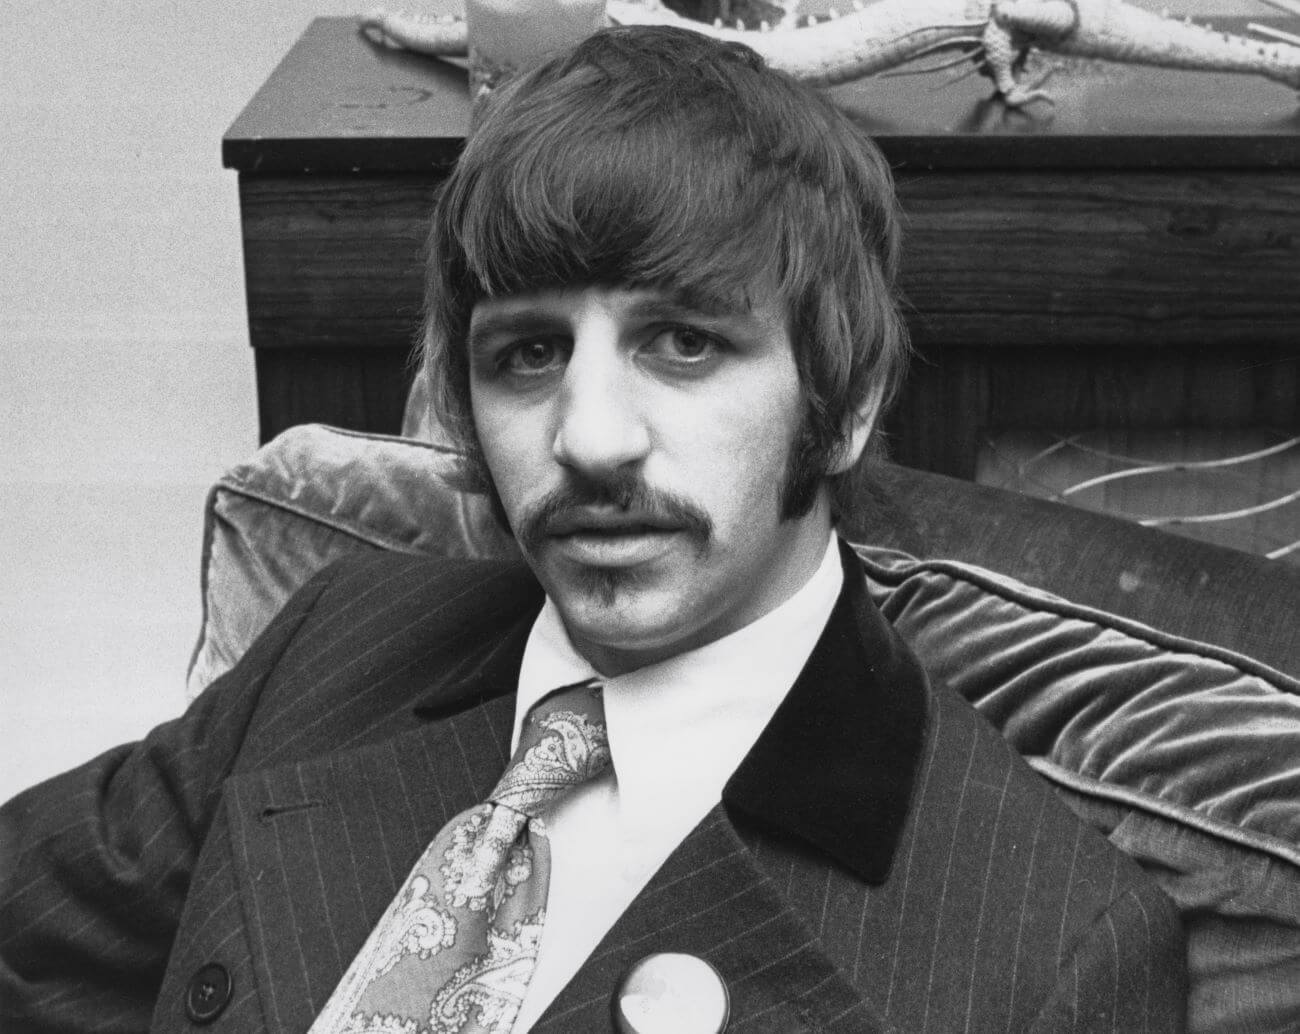 Ringo Starr, the drummer of The Beatles, wears a tie and sits in an arm chair.